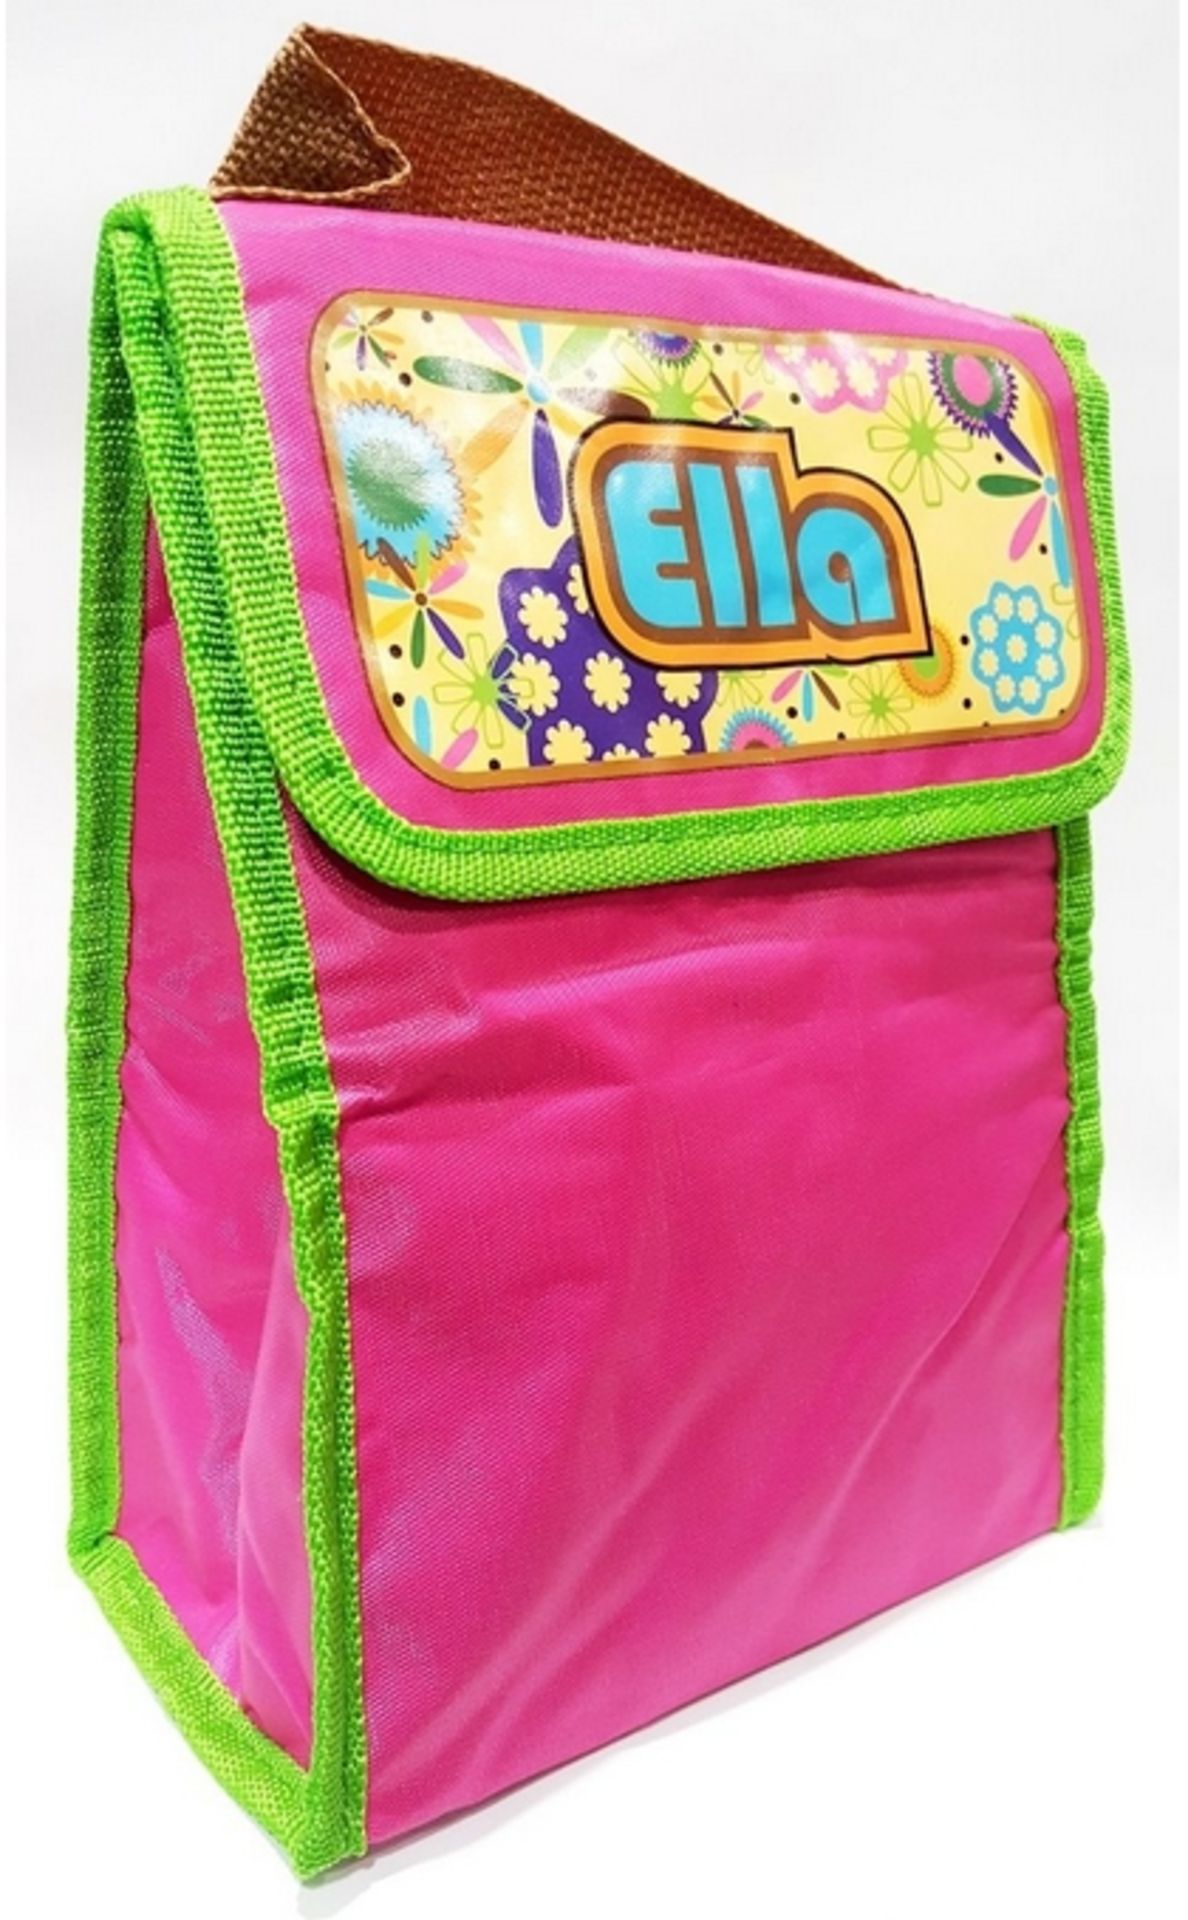 25 RANDOMLY PICKED FROM 100S OF NAMES Children's Personalised Lunch Bags - Image 2 of 3